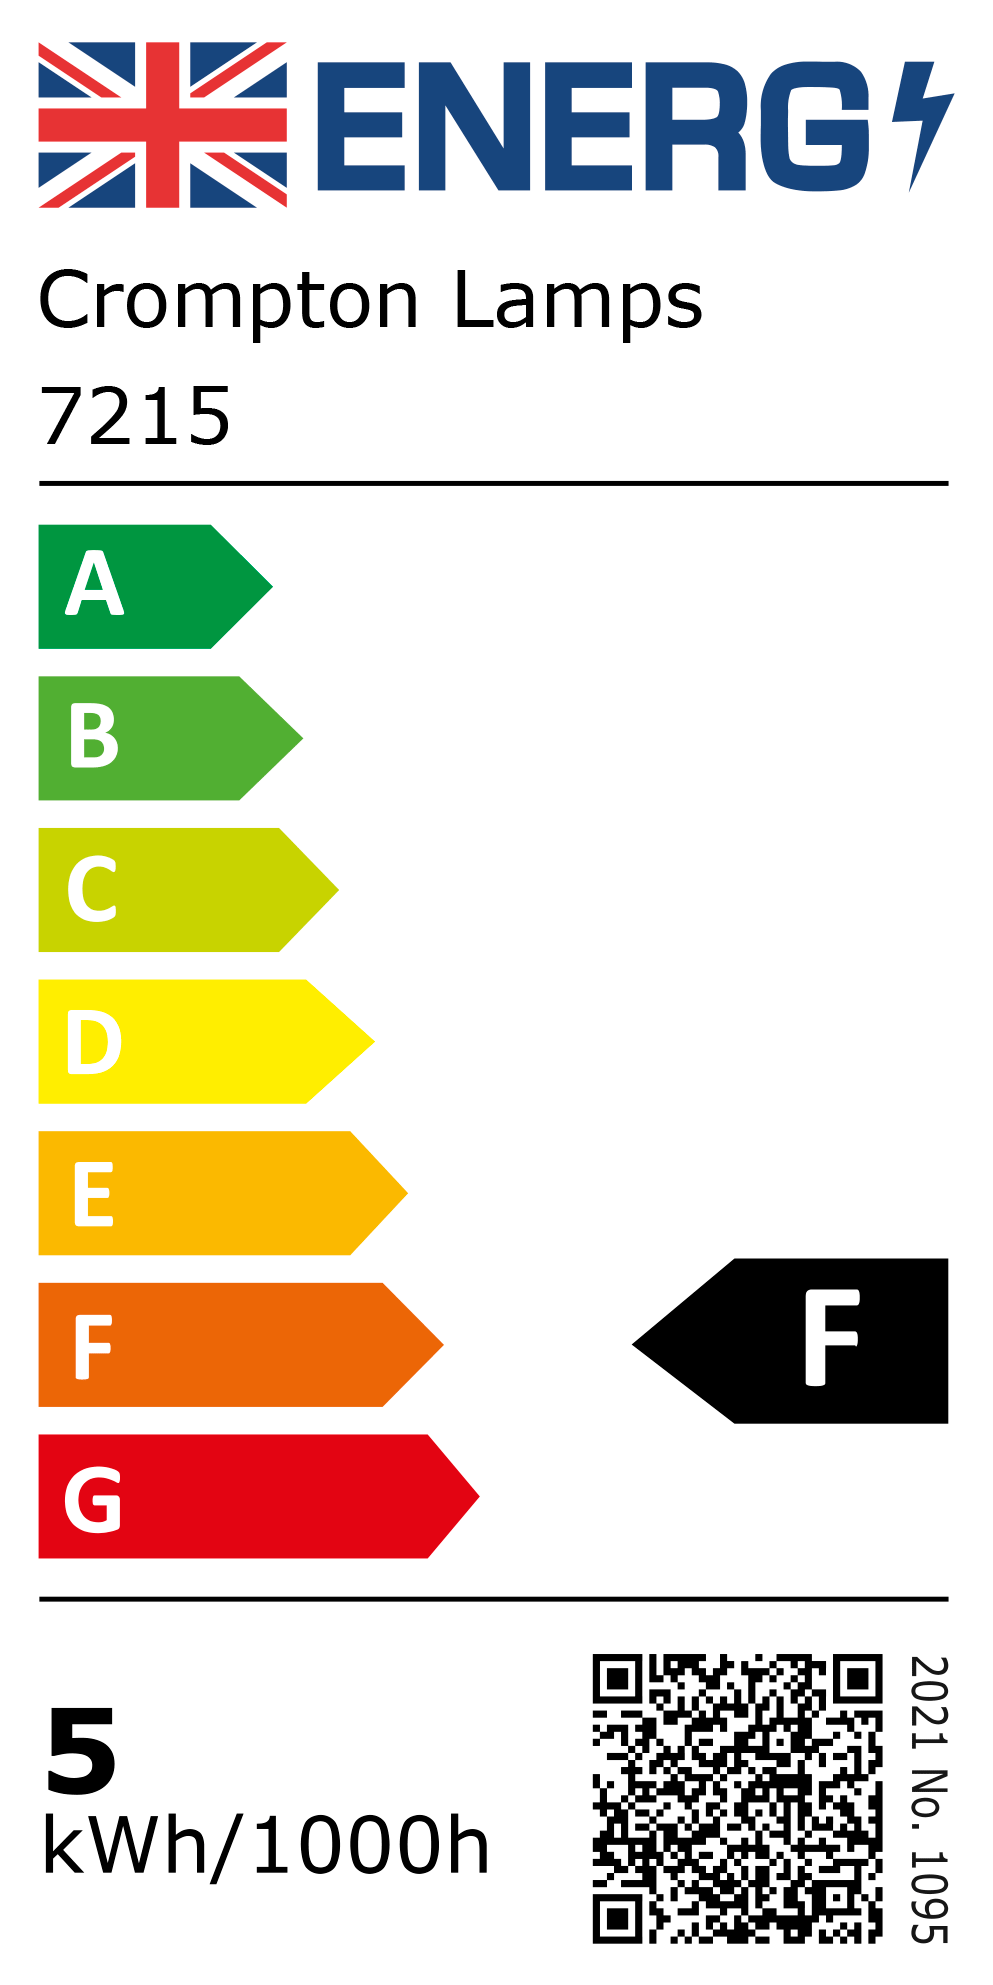 New 2021 Energy Rating Label: Stock Code 7215